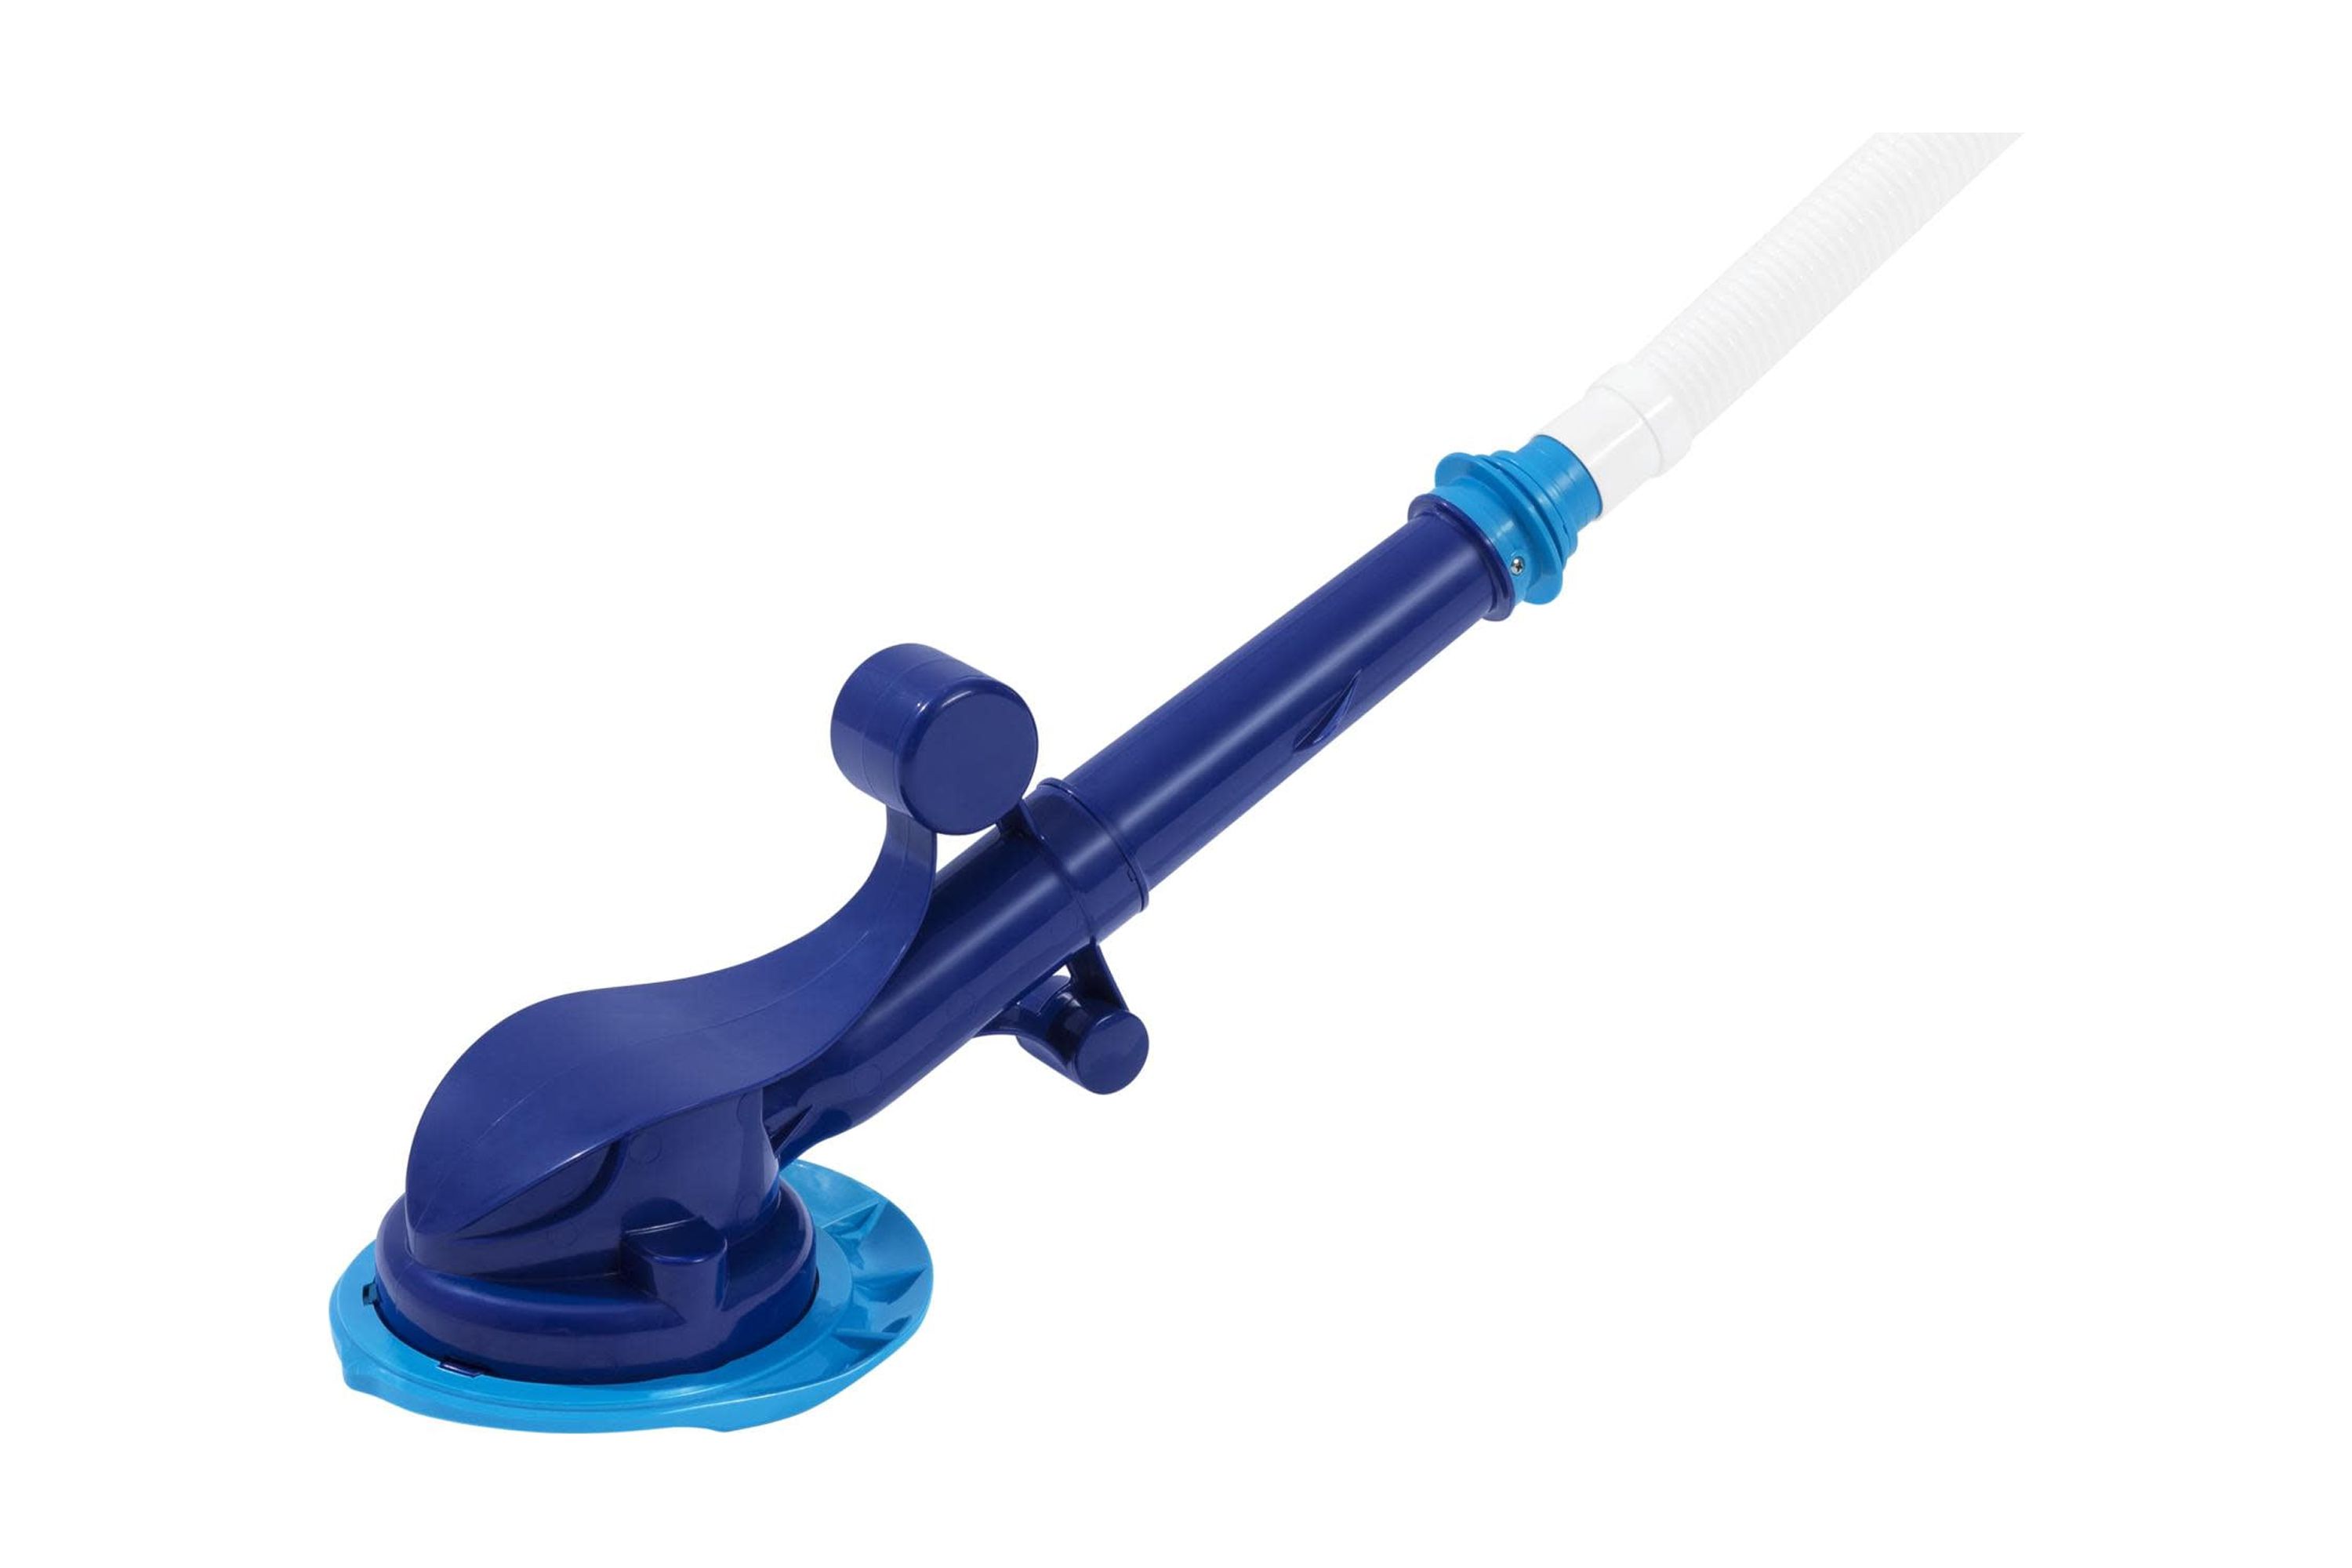 Flowclear AquaClimb Automatic Water-Powered Above Ground Pool Cleaning Vacuum - image 1 of 10